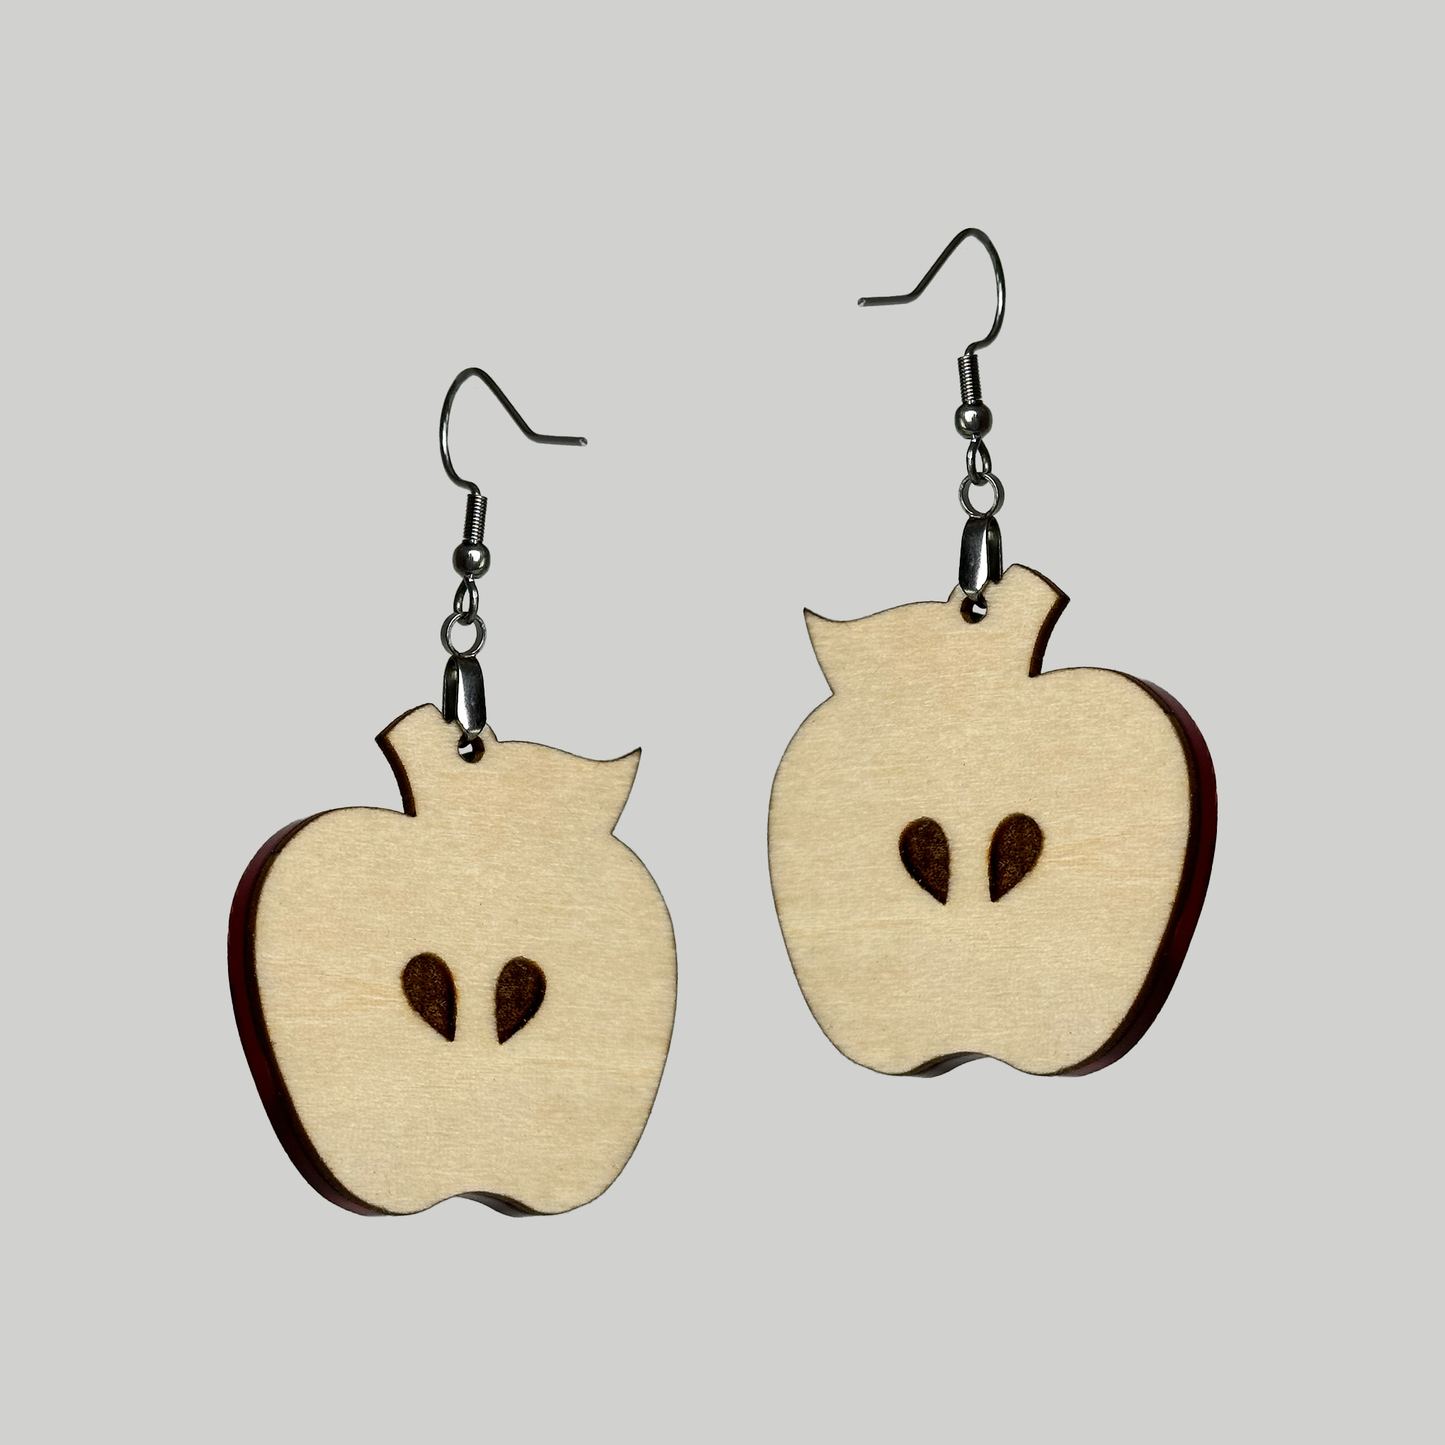 Apple Earrings: Unique fruit-inspired adornments for a touch of playful elegance by Our Family Designs.